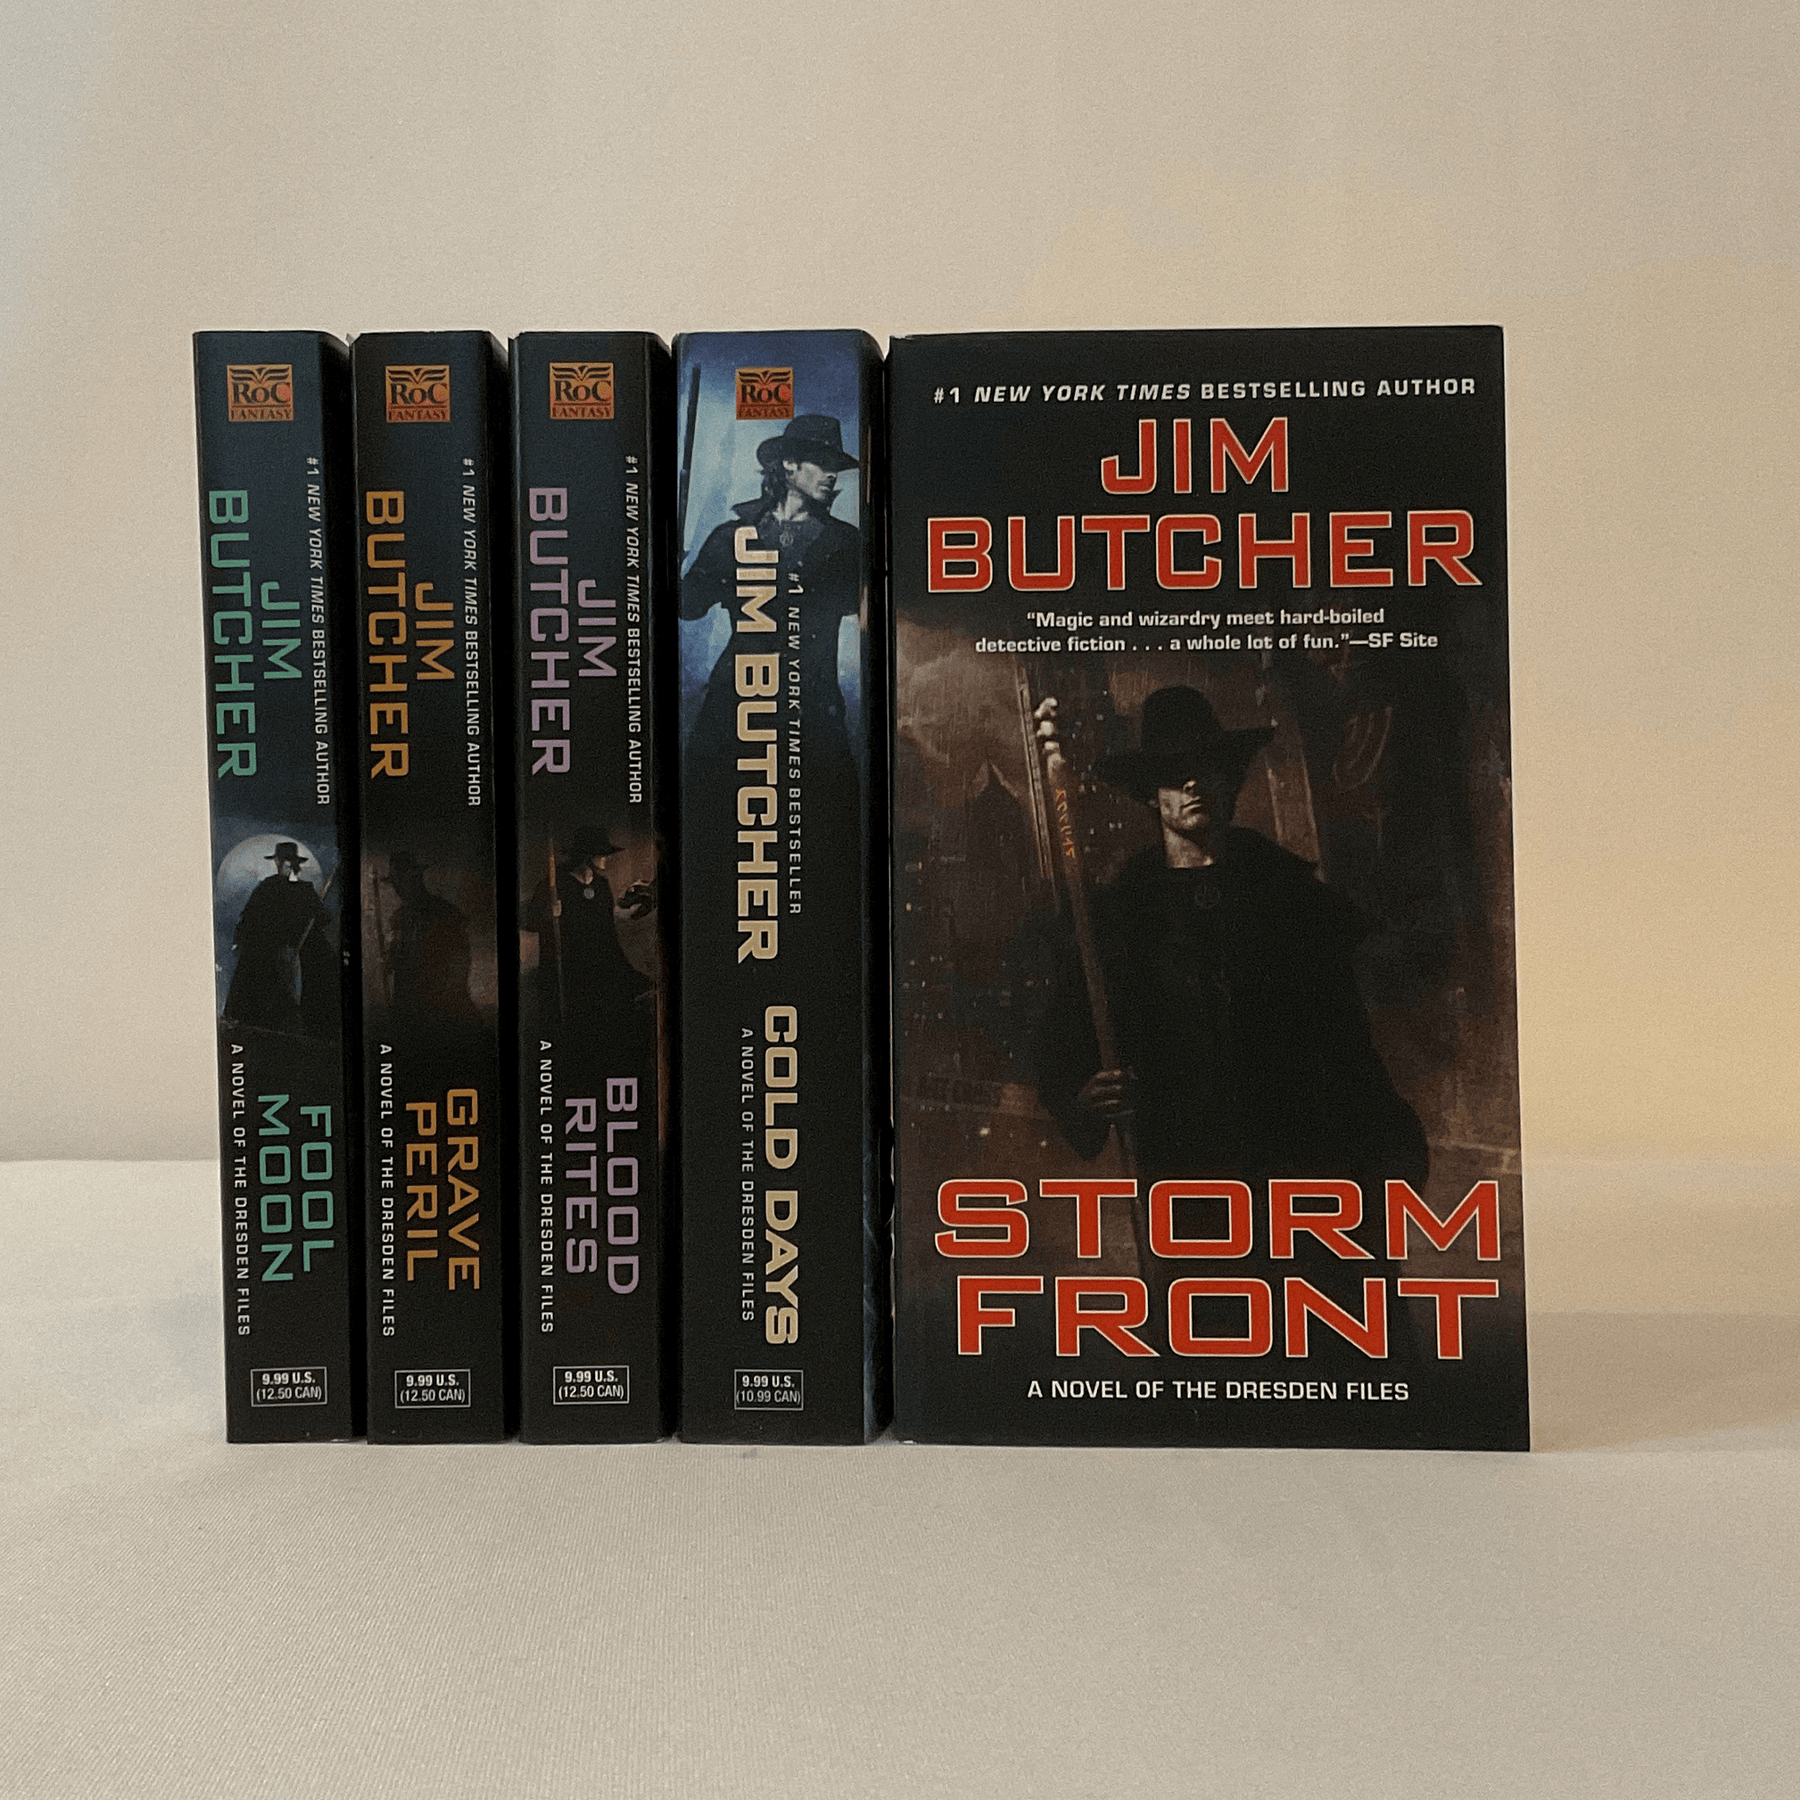 Battle Ground (Dresden Files Book 17) See more